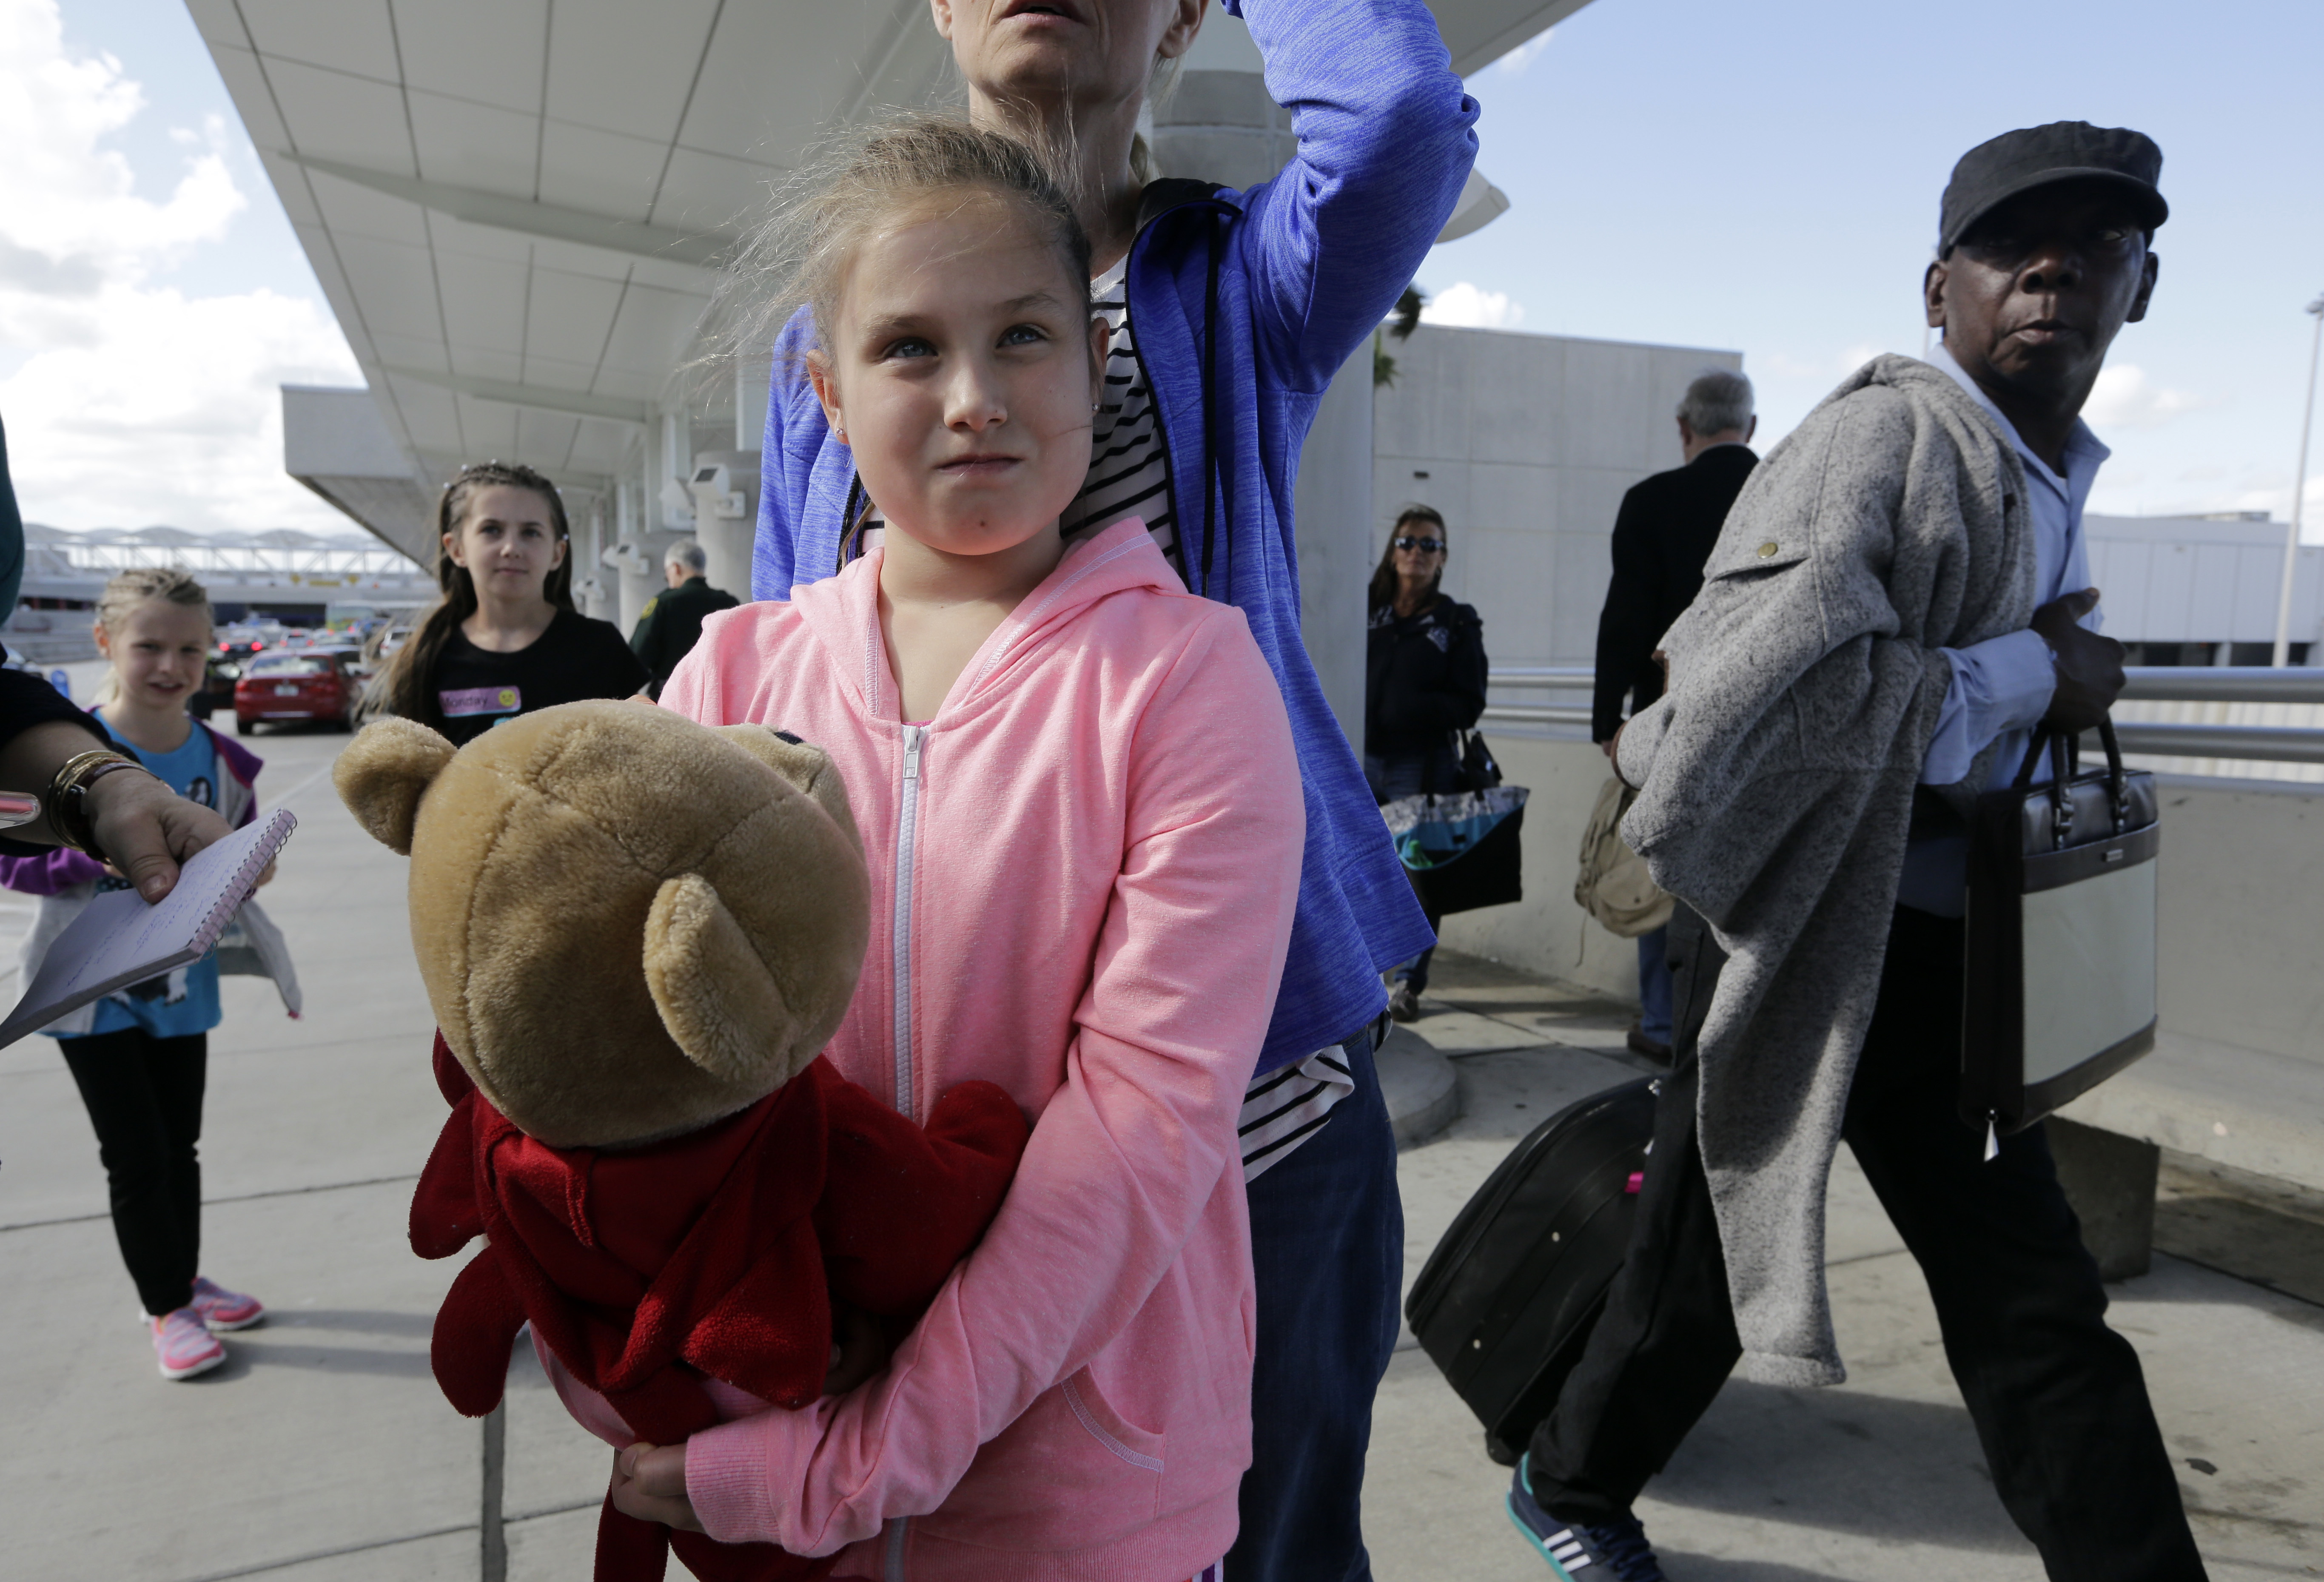 Courtney Gelinas talks with the news media after being reunited with her bear Rufus, at the Fort Lauderdale-Hollywood International Airport, Tuesday, Jan. 10, 2017, in Fort Lauderdale, Fla. Gelinas, of Windsor, Ontario, Canada, was traveling home with her family after a Caribbean cruise. They became separated from their belongings as they fled during last week's shooting at the airport in which five people were killed. (AP Photo/Lynne Sladky)